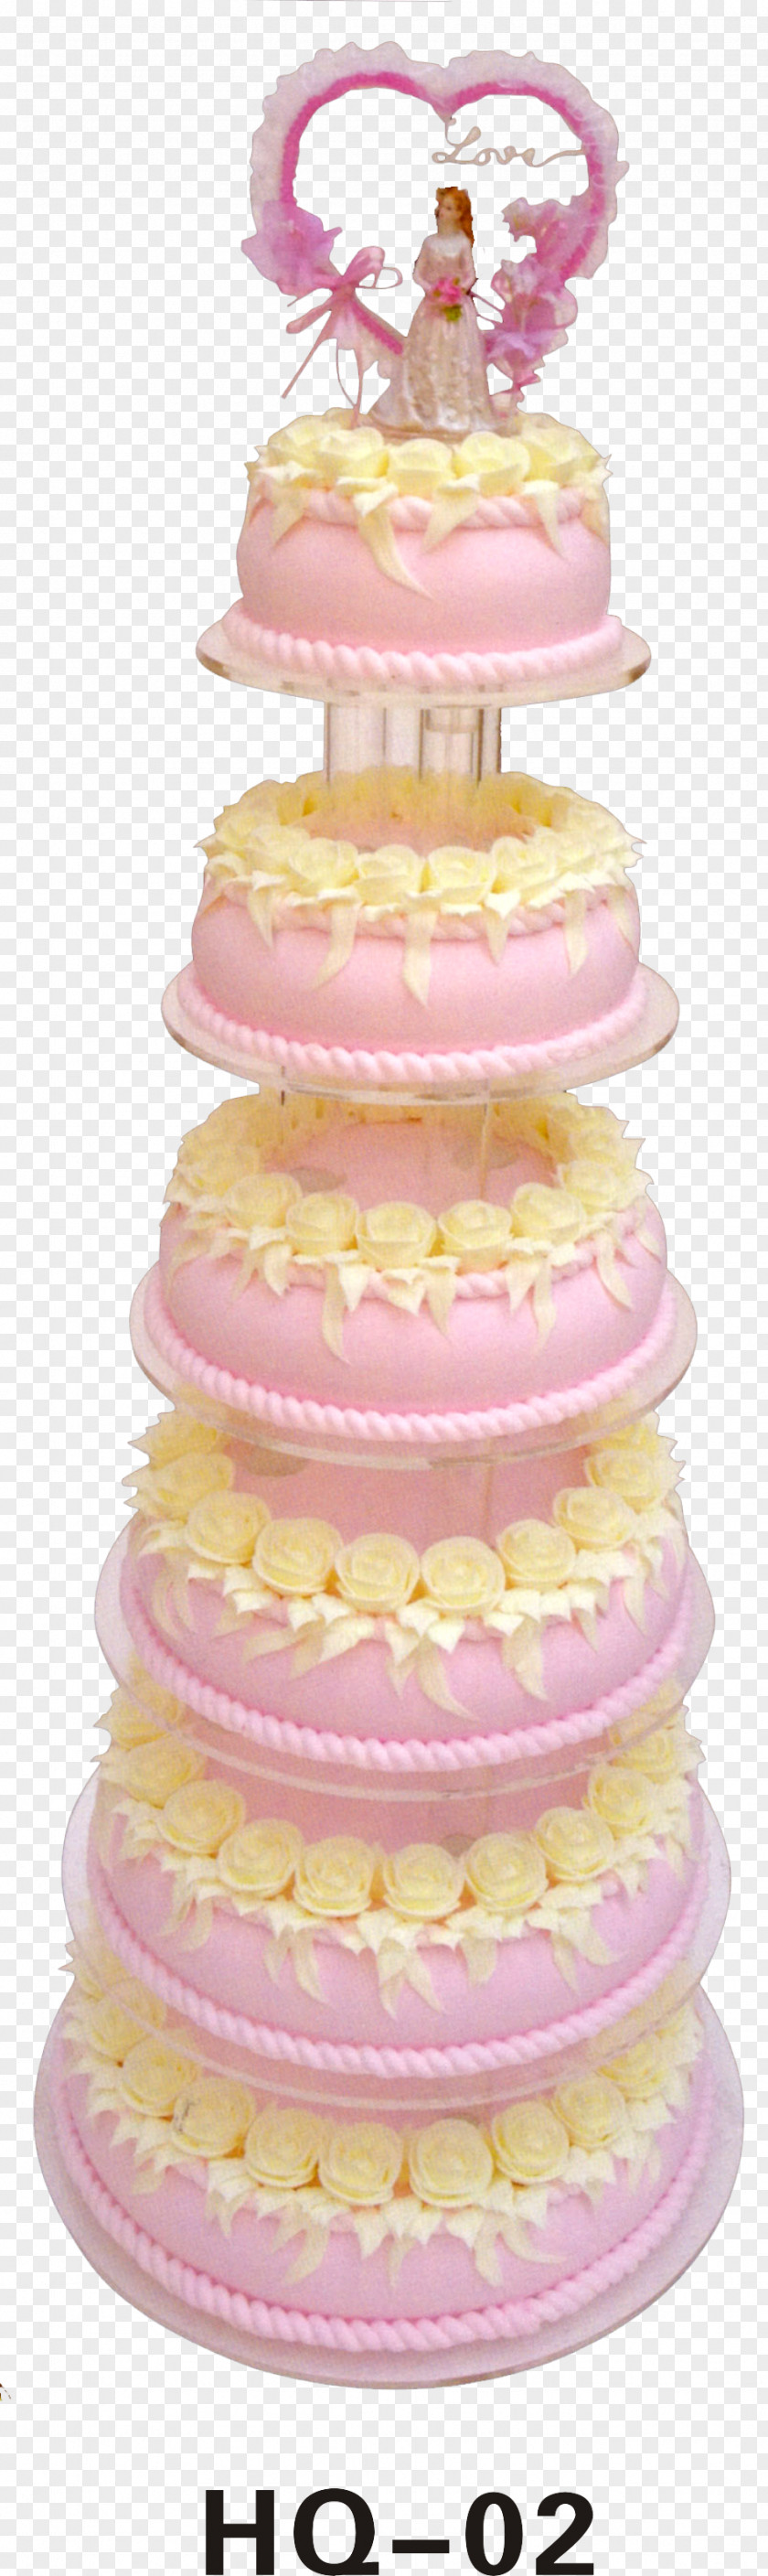 Wedding Cakes Cake Torte Layer Pastry PNG